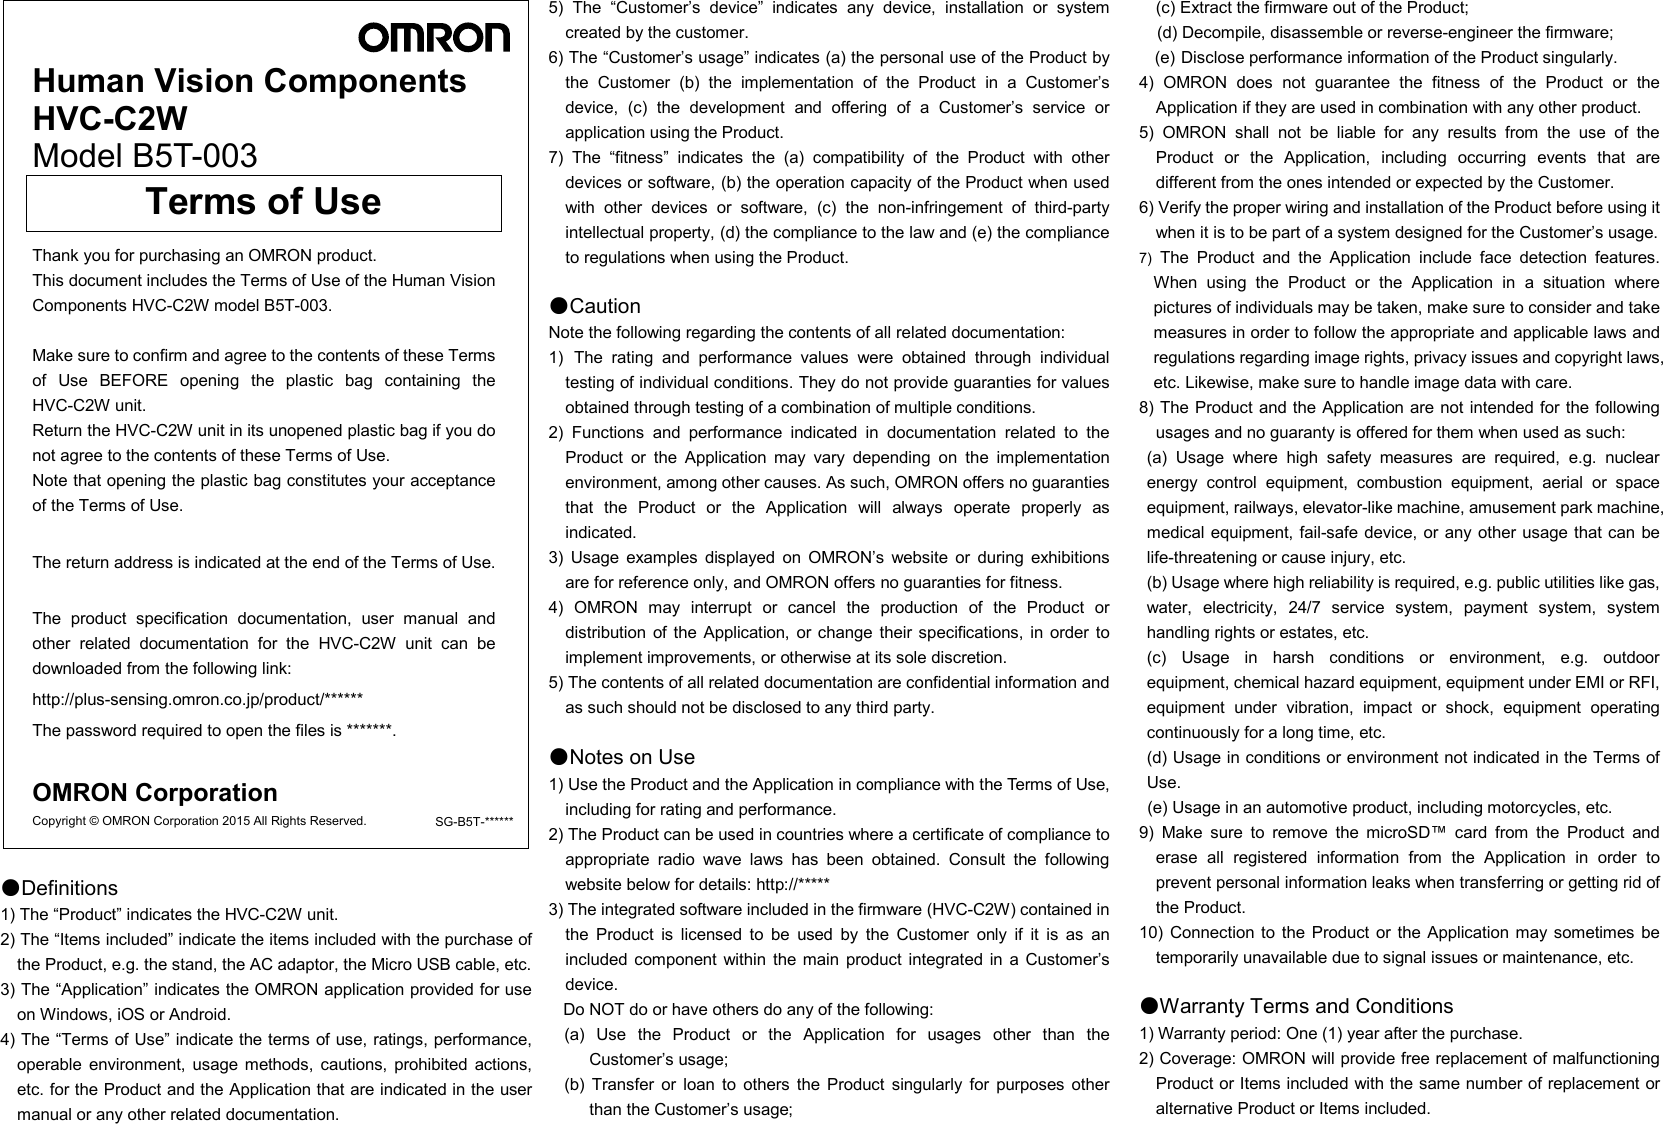          Human Vision Components HVC-C2W   Model B5T-003      Terms of Use   Thank you for purchasing an OMRON product. This document includes the Terms of Use of the Human Vision Components HVC-C2W model B5T-003.  Make sure to confirm and agree to the contents of these Terms of  Use  BEFORE  opening  the  plastic  bag  containing  the HVC-C2W unit. Return the HVC-C2W unit in its unopened plastic bag if you do not agree to the contents of these Terms of Use. Note that opening the plastic bag constitutes your acceptance of the Terms of Use.  The return address is indicated at the end of the Terms of Use.  The  product  specification  documentation,  user  manual  and other  related  documentation  for  the  HVC-C2W  unit  can  be downloaded from the following link: http://plus-sensing.omron.co.jp/product/****** The password required to open the files is *******.    OMRON Corporation Copyright © OMRON Corporation 2015 All Rights Reserved. SG-B5T-******        ●Definitions 1) The “Product” indicates the HVC-C2W unit. 2) The “Items included” indicate the items included with the purchase of the Product, e.g. the stand, the AC adaptor, the Micro USB cable, etc. 3) The “Application” indicates the OMRON application provided for use on Windows, iOS or Android. 4) The “Terms of Use” indicate the terms of use, ratings, performance, operable  environment,  usage  methods,  cautions,  prohibited  actions, etc. for the Product and the Application that are indicated in the user manual or any other related documentation.   5)  The  “Customer’s  device”  indicates  any  device,  installation  or  system created by the customer. 6) The “Customer’s usage” indicates (a) the personal use of the Product by the  Customer  (b)  the  implementation  of  the  Product  in  a  Customer’s device,  (c)  the  development  and  offering  of  a  Customer’s  service  or application using the Product.  7)  The  “fitness”  indicates  the  (a)  compatibility  of  the  Product  with  other devices or software, (b) the operation capacity of the Product when used with  other  devices  or  software,  (c)  the  non-infringement  of  third-party intellectual property, (d) the compliance to the law and (e) the compliance to regulations when using the Product.  ●Caution Note the following regarding the contents of all related documentation: 1) The  rating  and  performance  values  were  obtained  through  individual testing of individual conditions. They do not provide guaranties for values obtained through testing of a combination of multiple conditions. 2)  Functions  and  performance  indicated  in  documentation  related  to  the Product  or  the  Application  may  vary  depending  on  the  implementation environment, among other causes. As such, OMRON offers no guaranties that  the  Product  or  the  Application  will  always  operate  properly  as indicated. 3)  Usage  examples  displayed  on  OMRON’s  website  or  during  exhibitions are for reference only, and OMRON offers no guaranties for fitness. 4)  OMRON  may  interrupt  or  cancel  the  production  of  the  Product  or distribution of the Application,  or change their specifications,  in  order  to implement improvements, or otherwise at its sole discretion. 5) The contents of all related documentation are confidential information and as such should not be disclosed to any third party.  ●Notes on Use 1) Use the Product and the Application in compliance with the Terms of Use, including for rating and performance. 2) The Product can be used in countries where a certificate of compliance to appropriate  radio  wave  laws  has  been  obtained.  Consult  the  following website below for details: http://***** 3) The integrated software included in the firmware (HVC-C2W) contained in the  Product  is  licensed  to  be  used  by  the  Customer  only  if  it  is  as  an included component  within  the main  product  integrated in  a  Customer’s device. Do NOT do or have others do any of the following: (a)  Use  the  Product  or  the  Application  for  usages  other  than  the Customer’s usage; (b)  Transfer  or  loan  to  others  the  Product  singularly  for  purposes  other than the Customer’s usage; (c) Extract the firmware out of the Product; (d) Decompile, disassemble or reverse-engineer the firmware; (e) Disclose performance information of the Product singularly. 4)  OMRON  does  not  guarantee  the  fitness  of  the  Product  or  the Application if they are used in combination with any other product. 5)  OMRON  shall  not  be  liable  for  any  results  from  the  use  of  the Product  or  the  Application,  including  occurring  events  that  are different from the ones intended or expected by the Customer. 6) Verify the proper wiring and installation of the Product before using it when it is to be part of a system designed for the Customer’s usage. 7)  The  Product  and  the  Application  include  face  detection  features. When  using  the  Product  or  the  Application  in  a  situation  where pictures of individuals may be taken, make sure to consider and take measures in order to follow the appropriate and applicable laws and regulations regarding image rights, privacy issues and copyright laws, etc. Likewise, make sure to handle image data with care. 8) The Product and the Application are not intended for the following usages and no guaranty is offered for them when used as such: (a)  Usage  where  high  safety  measures  are  required,  e.g.  nuclear energy  control  equipment,  combustion  equipment,  aerial  or  space equipment, railways, elevator-like machine, amusement park machine, medical equipment, fail-safe device, or  any other usage that can be life-threatening or cause injury, etc. (b) Usage where high reliability is required, e.g. public utilities like gas, water,  electricity,  24/7  service  system,  payment  system,  system handling rights or estates, etc. (c)  Usage  in  harsh  conditions  or  environment,  e.g.  outdoor     equipment, chemical hazard equipment, equipment under EMI or RFI, equipment  under  vibration,  impact  or  shock,  equipment  operating continuously for a long time, etc. (d) Usage in conditions or environment not indicated in the Terms of Use. (e) Usage in an automotive product, including motorcycles, etc. 9)  Make  sure  to  remove  the  microSD™  card  from  the  Product  and   erase  all  registered  information  from  the  Application  in  order  to prevent personal information leaks when transferring or getting rid of the Product. 10)  Connection  to  the Product  or  the Application may  sometimes be temporarily unavailable due to signal issues or maintenance, etc.  ●Warranty Terms and Conditions 1) Warranty period: One (1) year after the purchase. 2) Coverage: OMRON will provide free replacement of malfunctioning Product or Items included with the same number of replacement or alternative Product or Items included. 